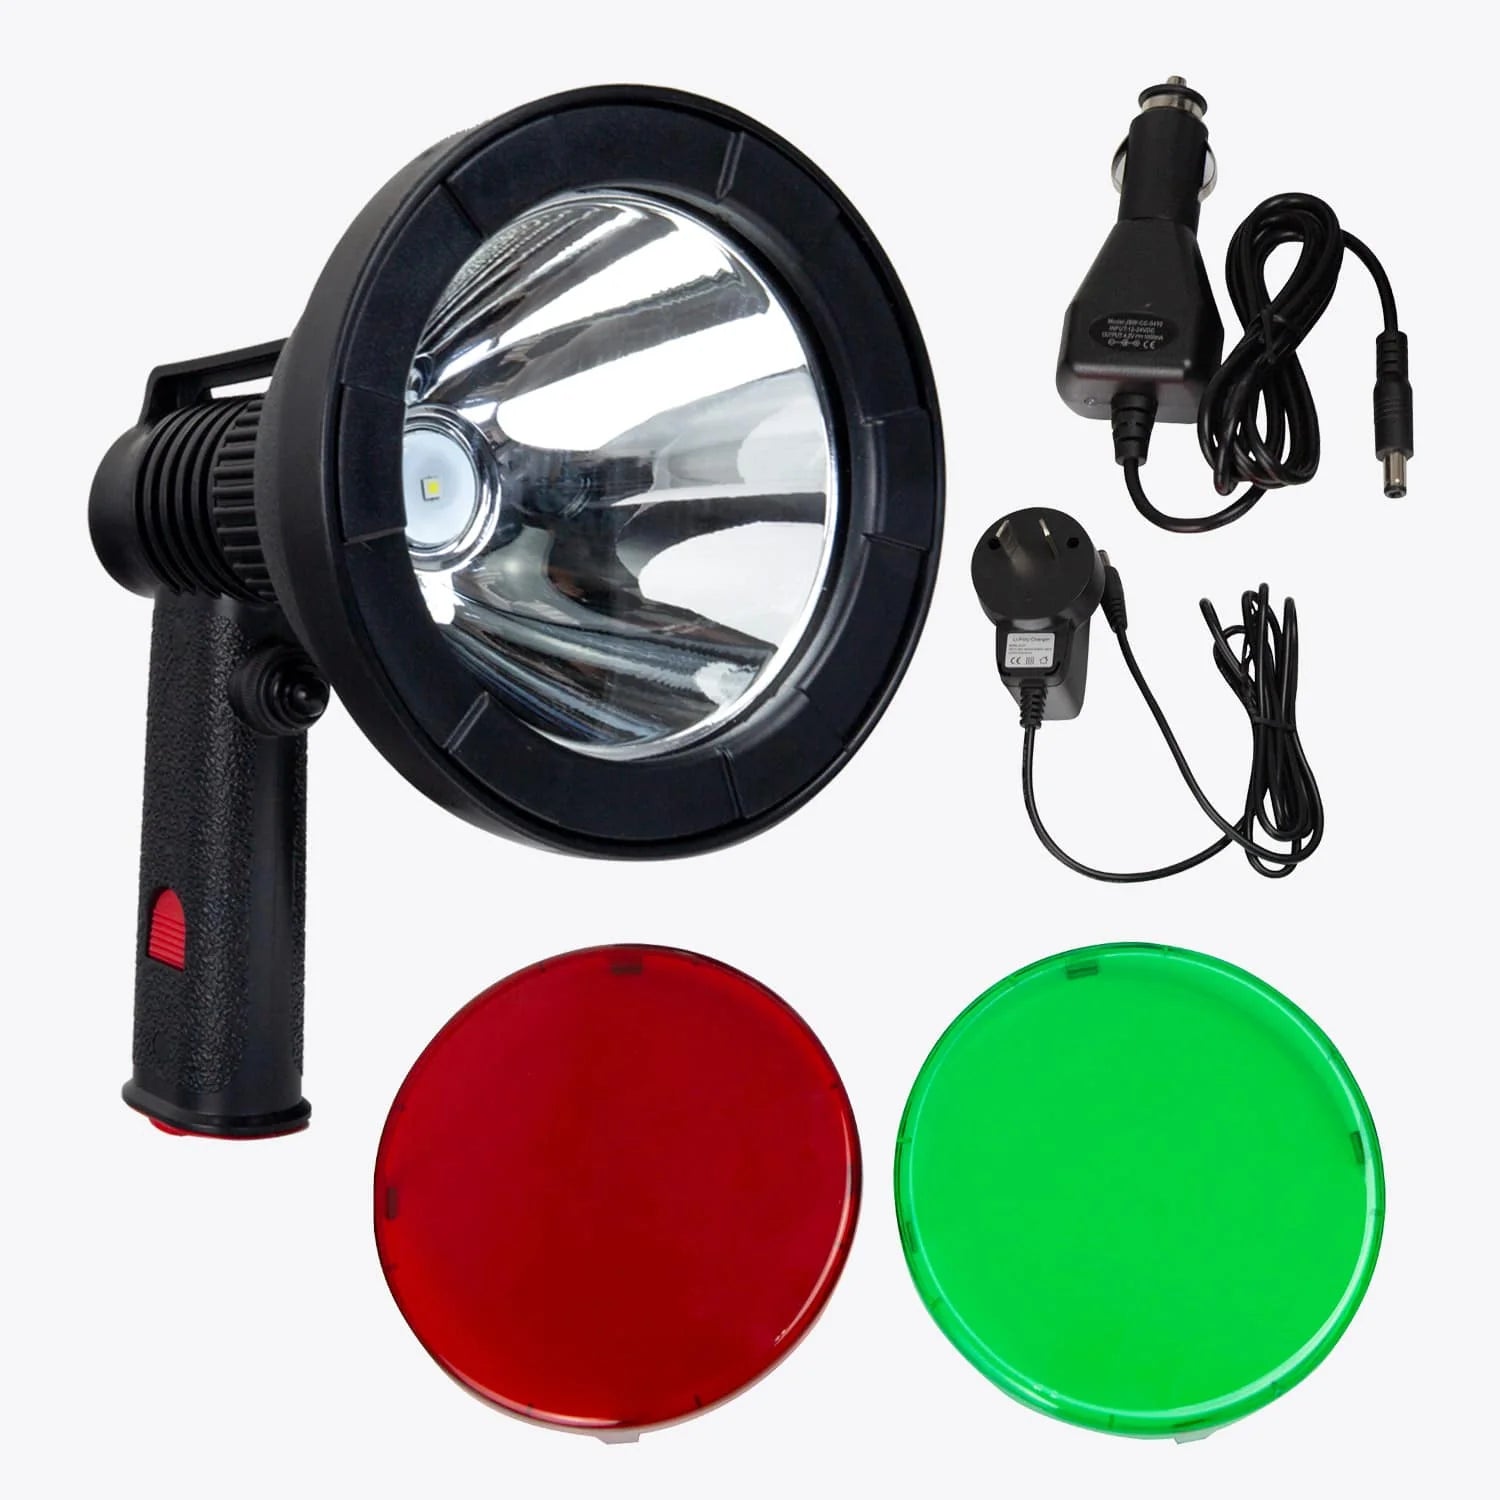 10W RECHARGEABLE HAND-HELD HUNTING SPOTLIGHT